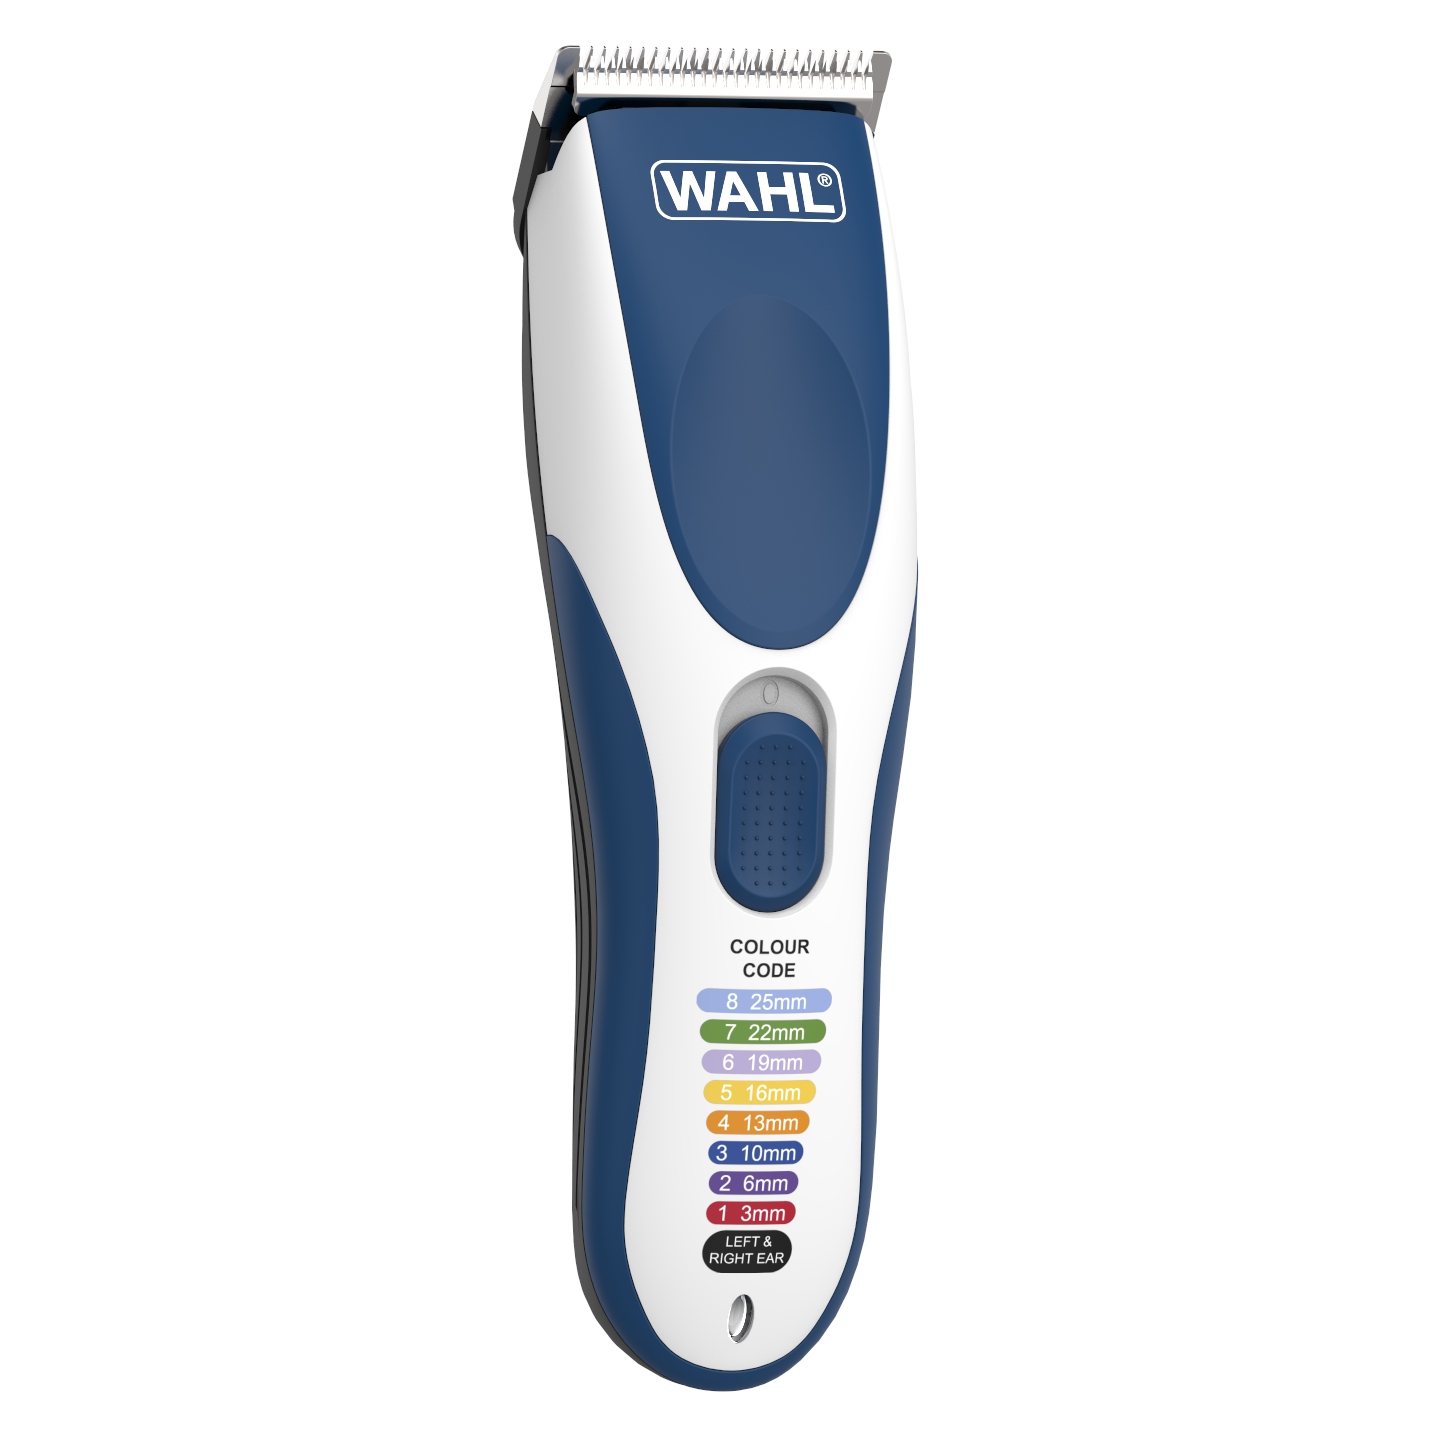 wahl color pro cordless rechargeable hair clipper trimmer model 9649